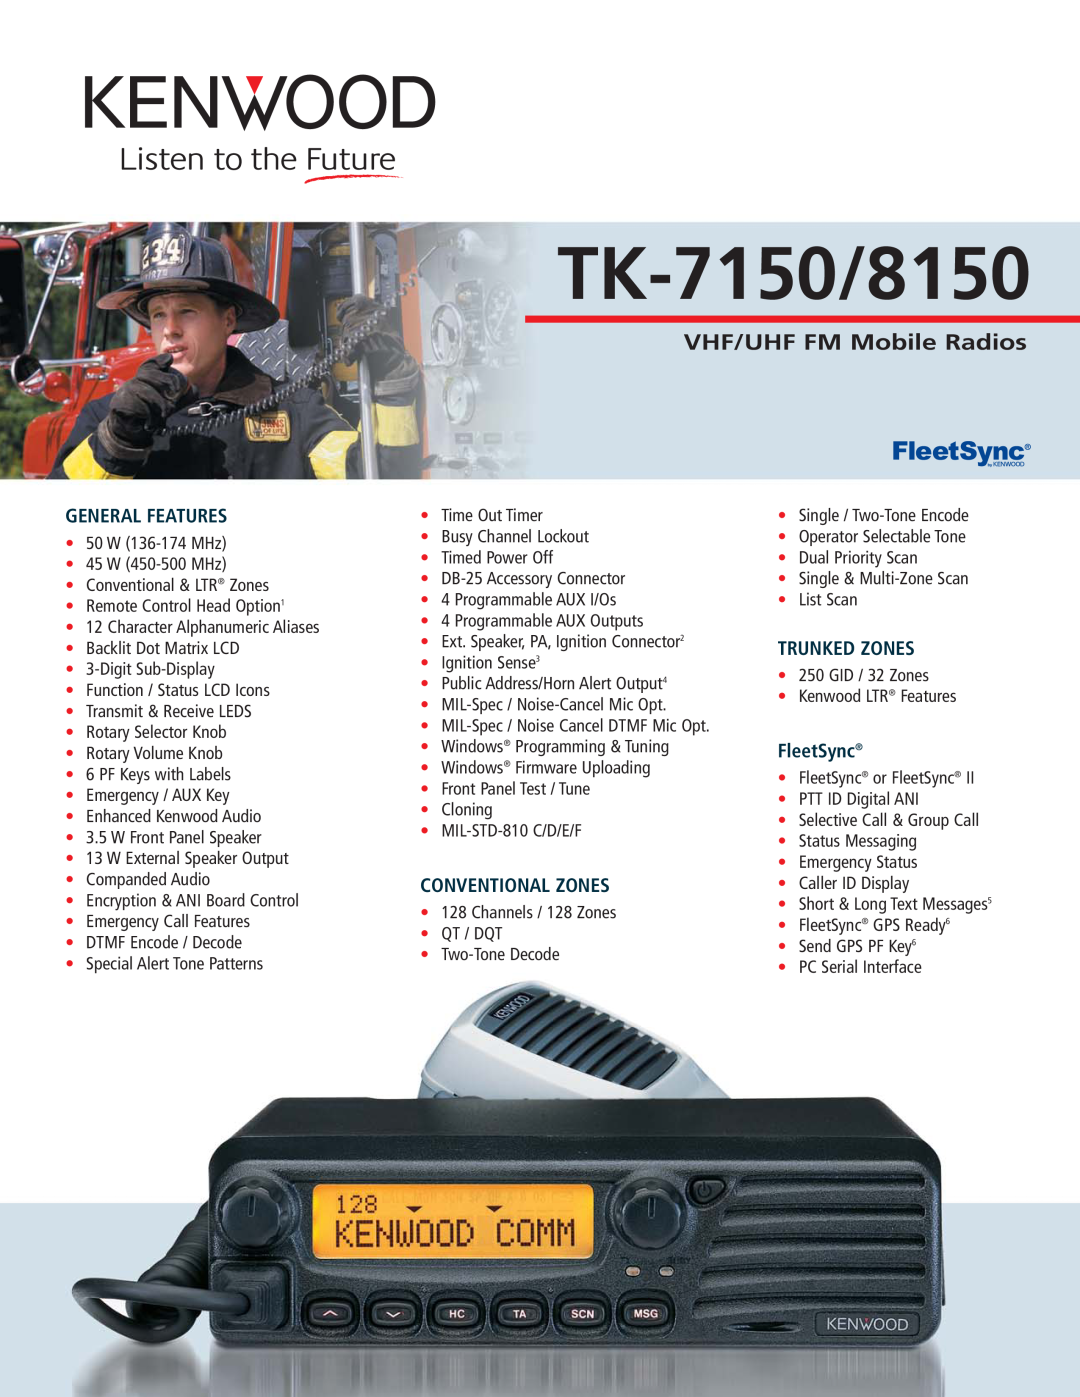 Kenwood manual TK-7150/8150, VHF/UHF FM Mobile Radios, General Features, Conventional Zones, Trunked Zones, FleetSync 